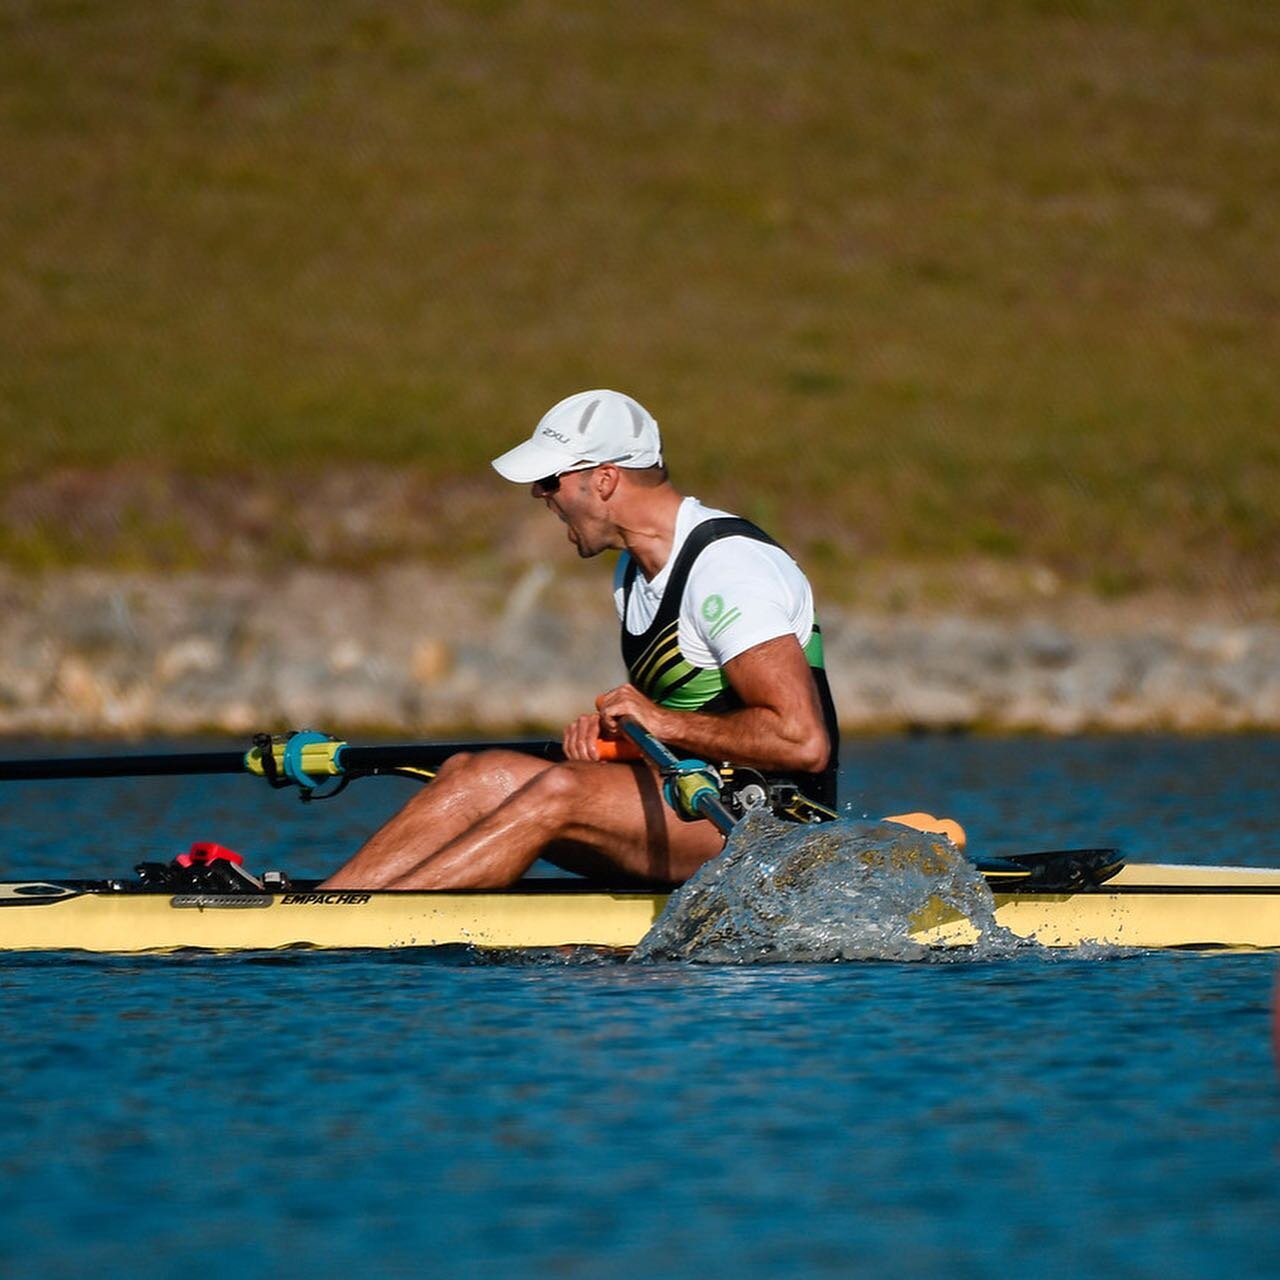 Congratulations to John Graves on winning Olympic Trials yesterday, and being named the Men&rsquo;s United States 1x, who will go on to race the FOQR in May to try and qualify for Tokyo 2020! 

And congratulations to the 5 other GRP members who raced